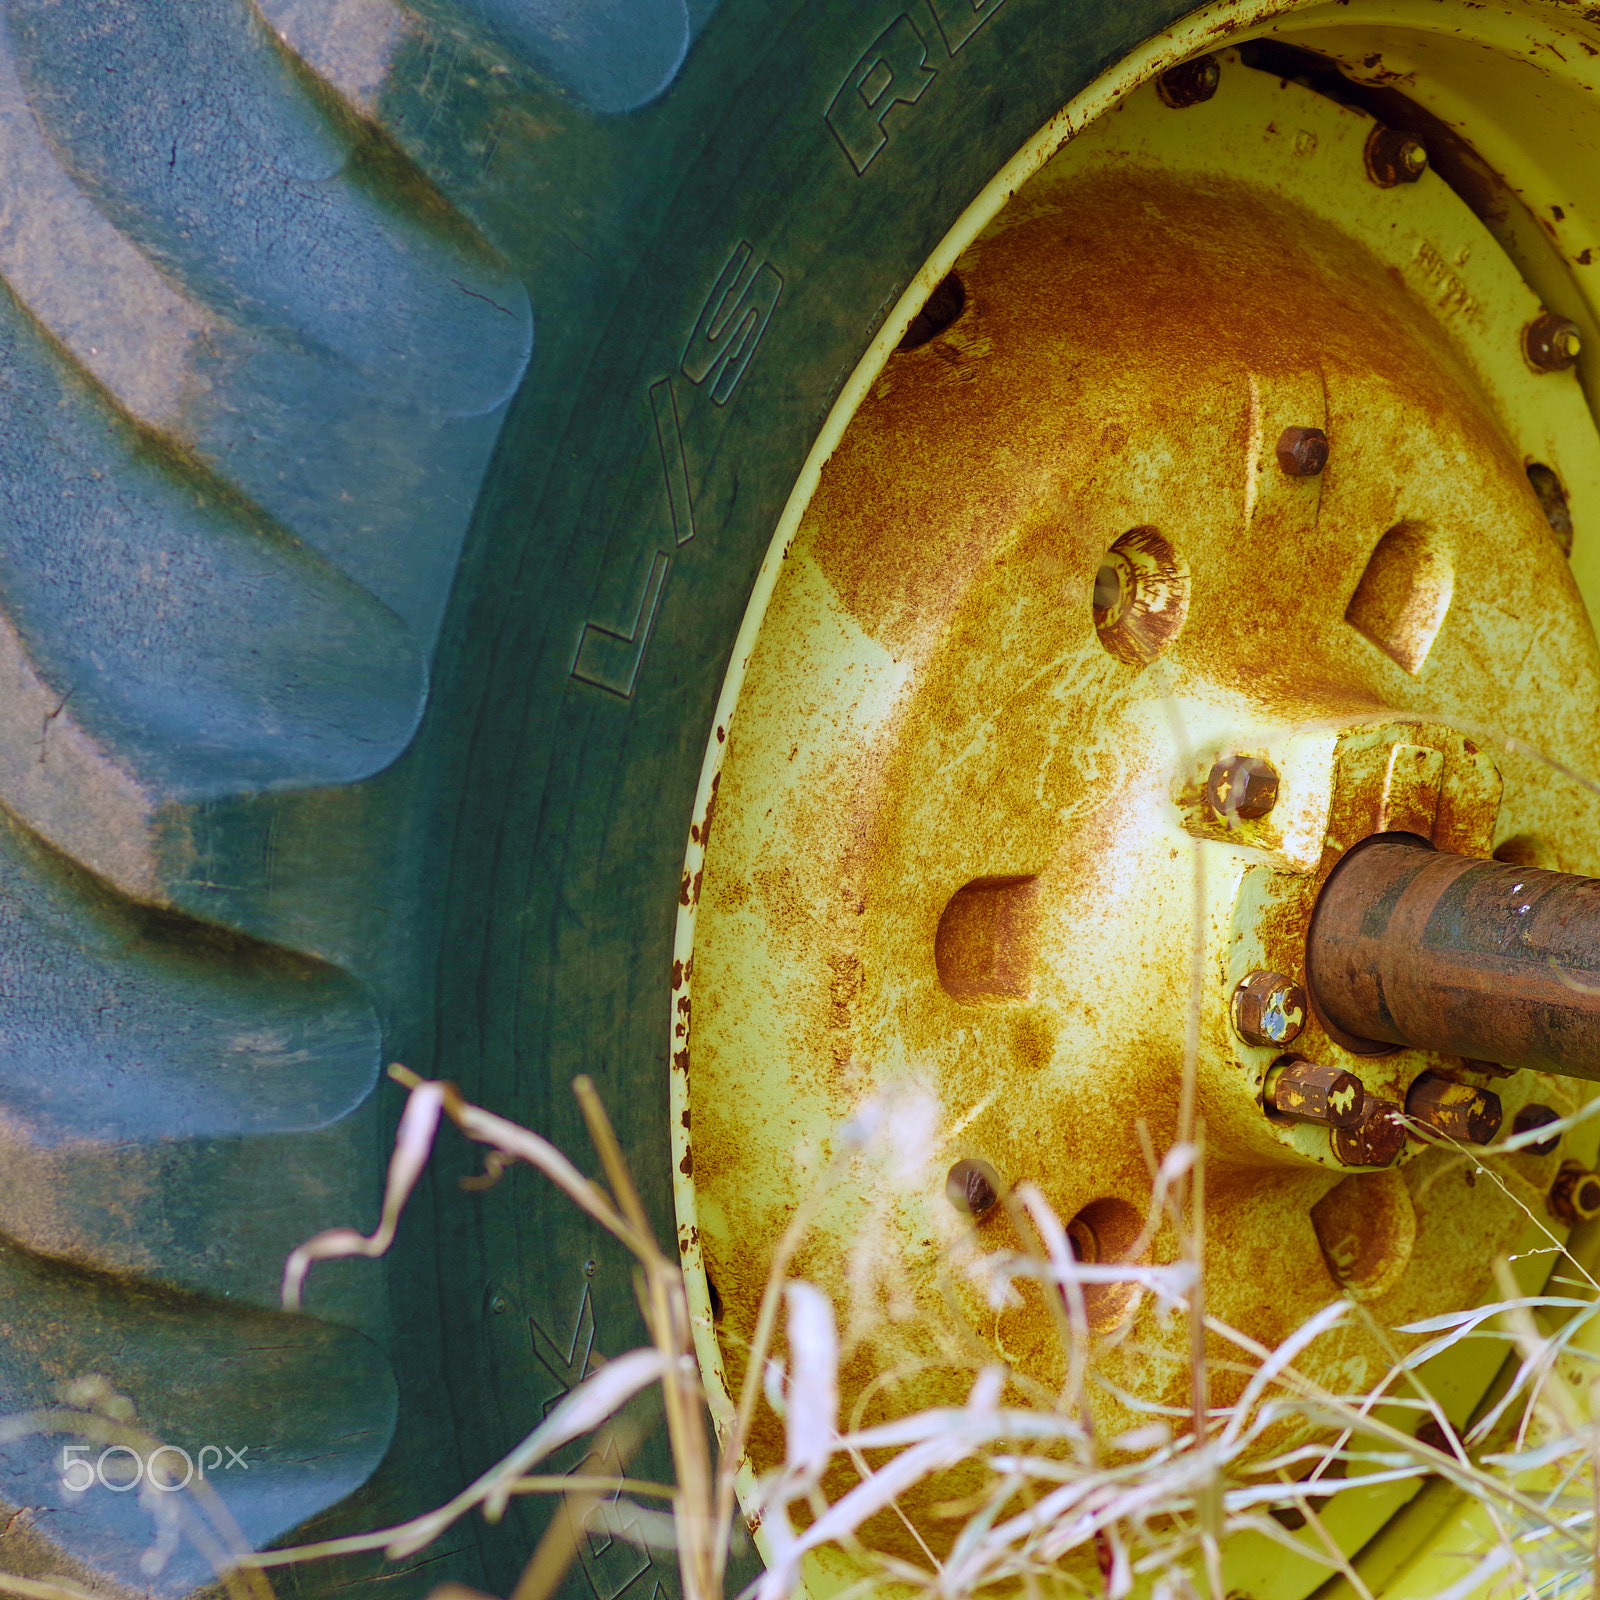 Pentax K-70 sample photo. Tractor tire photography